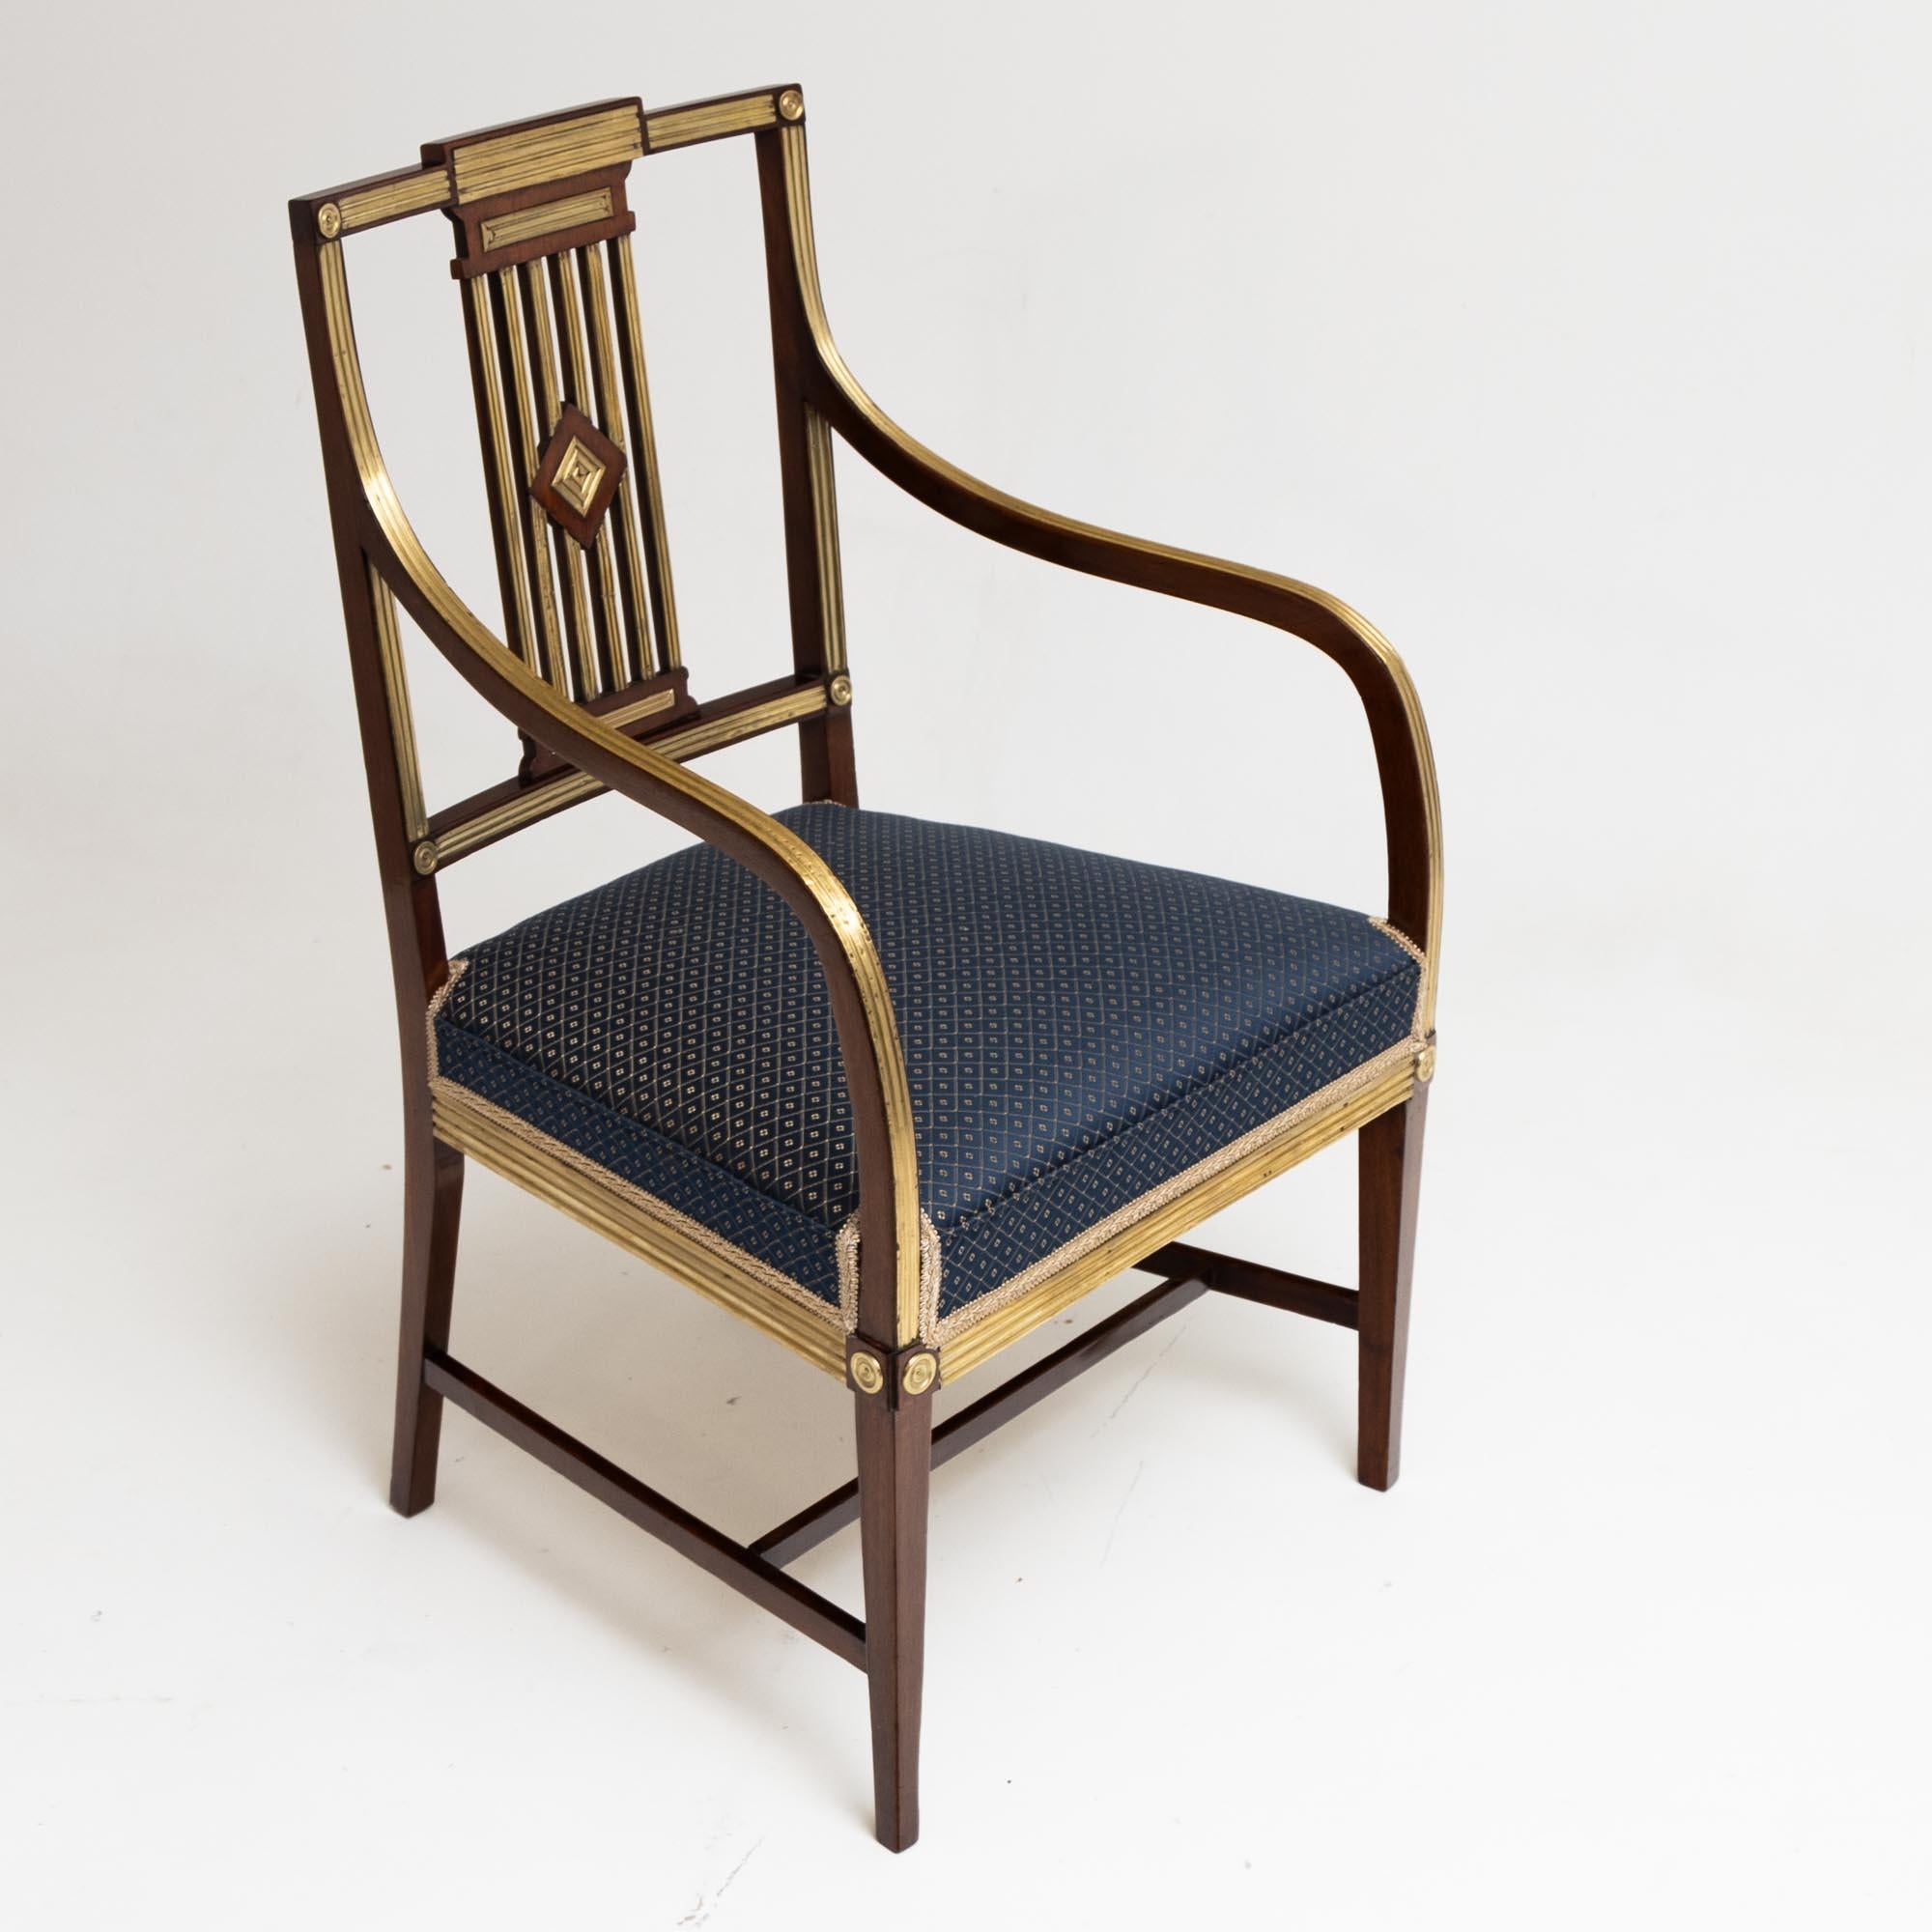 Pair of Neoclassical Dining Room Chairs, Brass, Baltic States, Late 18th Century 6